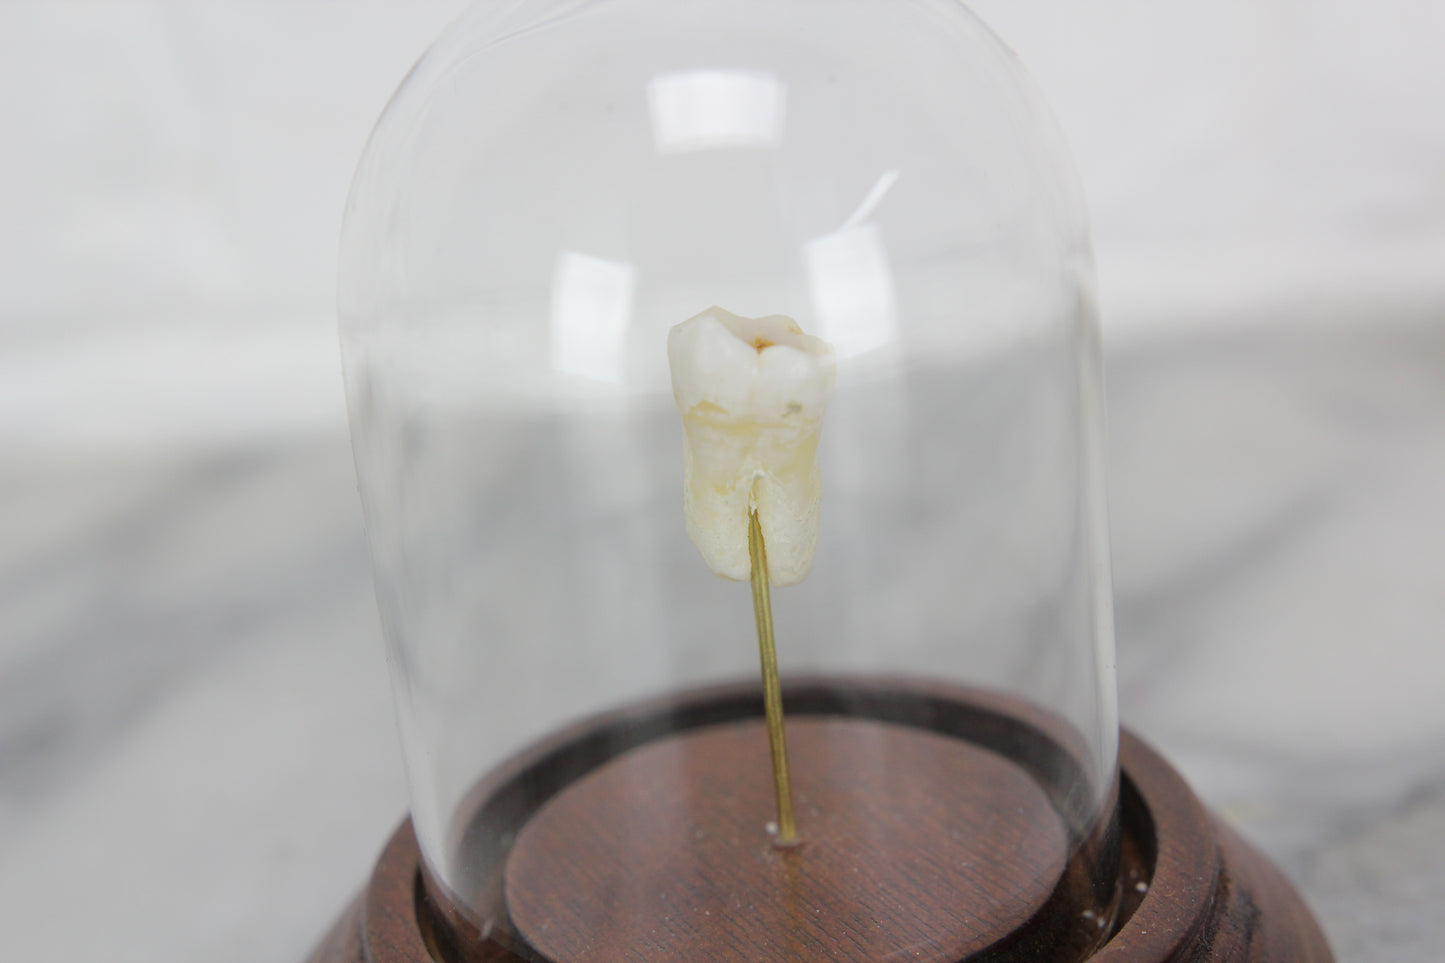 Human Tooth in Victorian Style Cloche Dome with Walnut Base